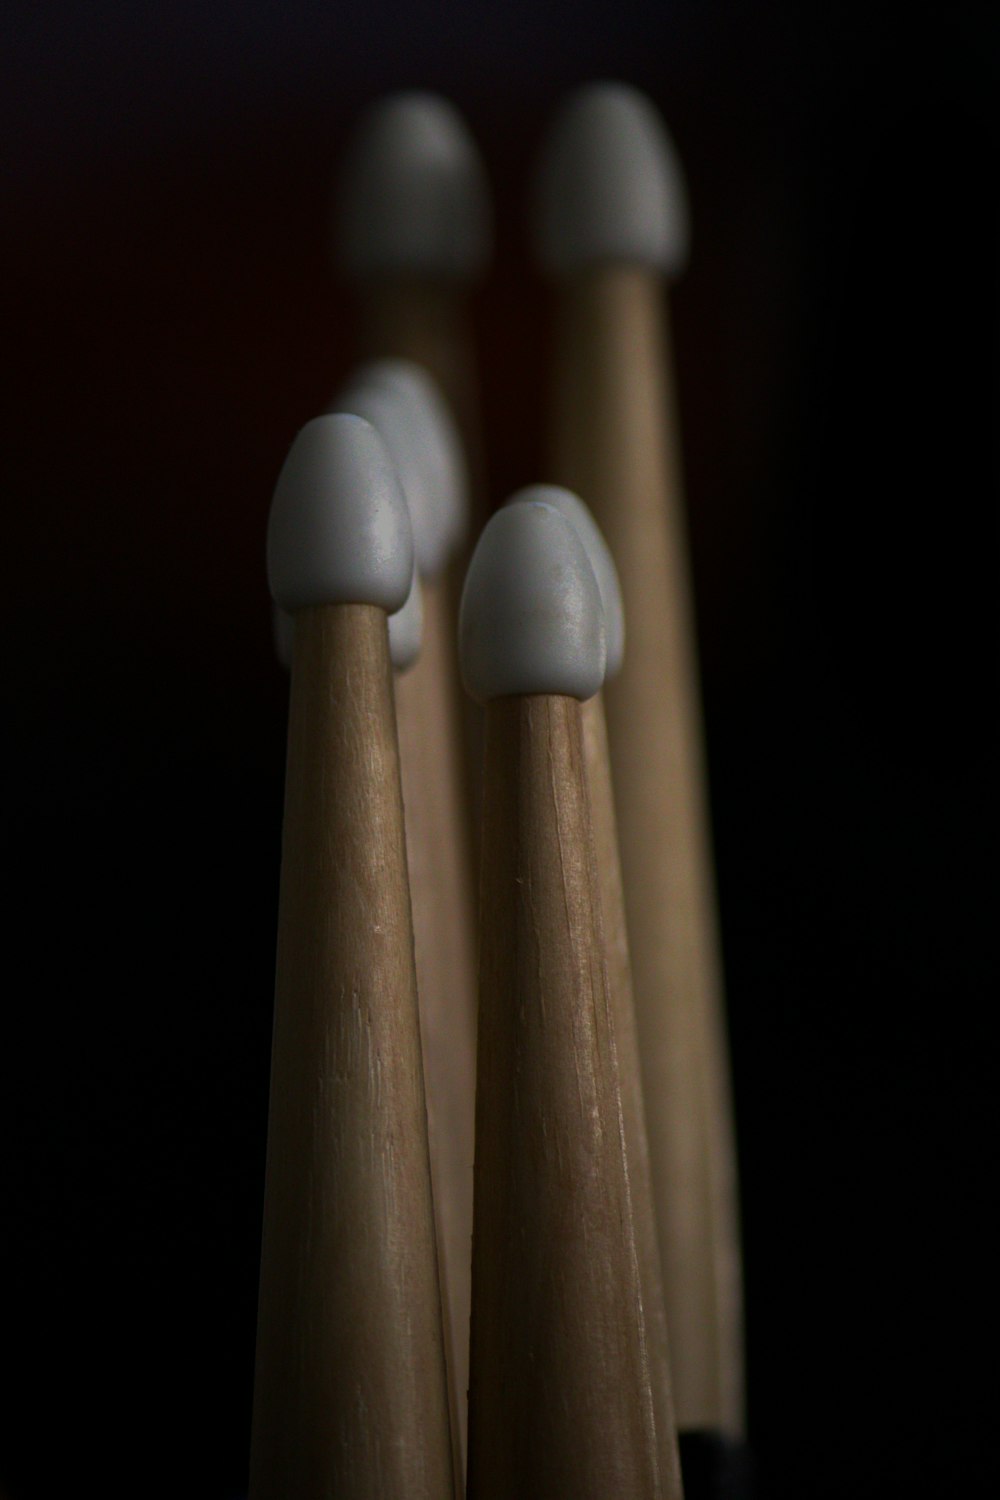 a close up of a group of toothbrushes